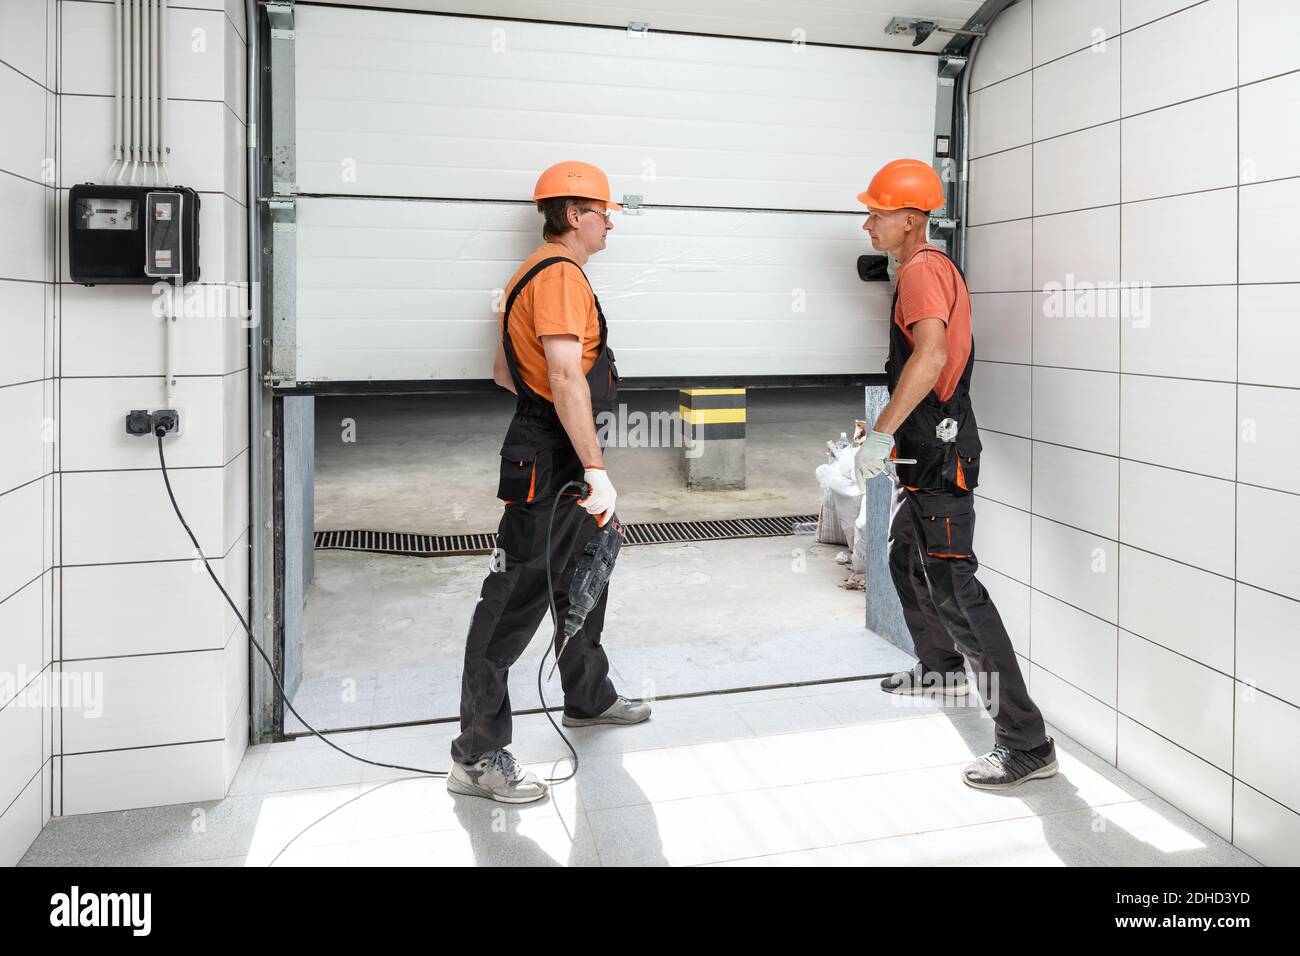 The workers are installing lift gates in the garage. Stock Photo